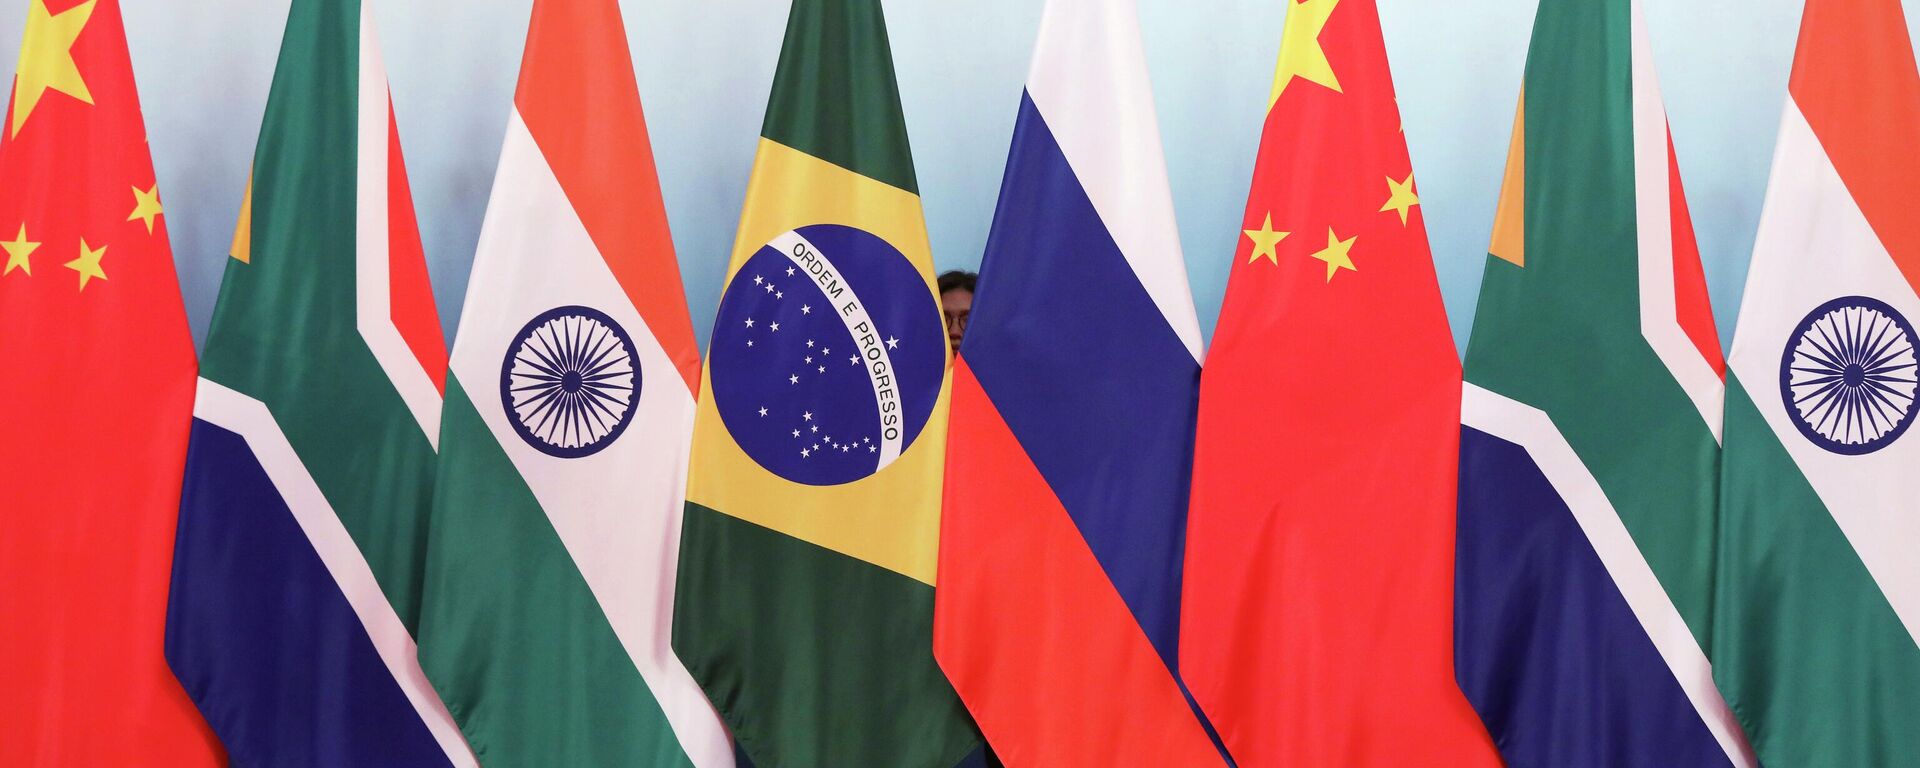 Staff worker stands behind national flags of Brazil, Russia, China, South Africa and India to tidy the flags ahead of a group photo during the BRICS Summit at the Xiamen International Conference and Exhibition Center in Xiamen, southeastern China's Fujian Province, Monday, Sept. 4, 2017. - Sputnik International, 1920, 03.12.2022